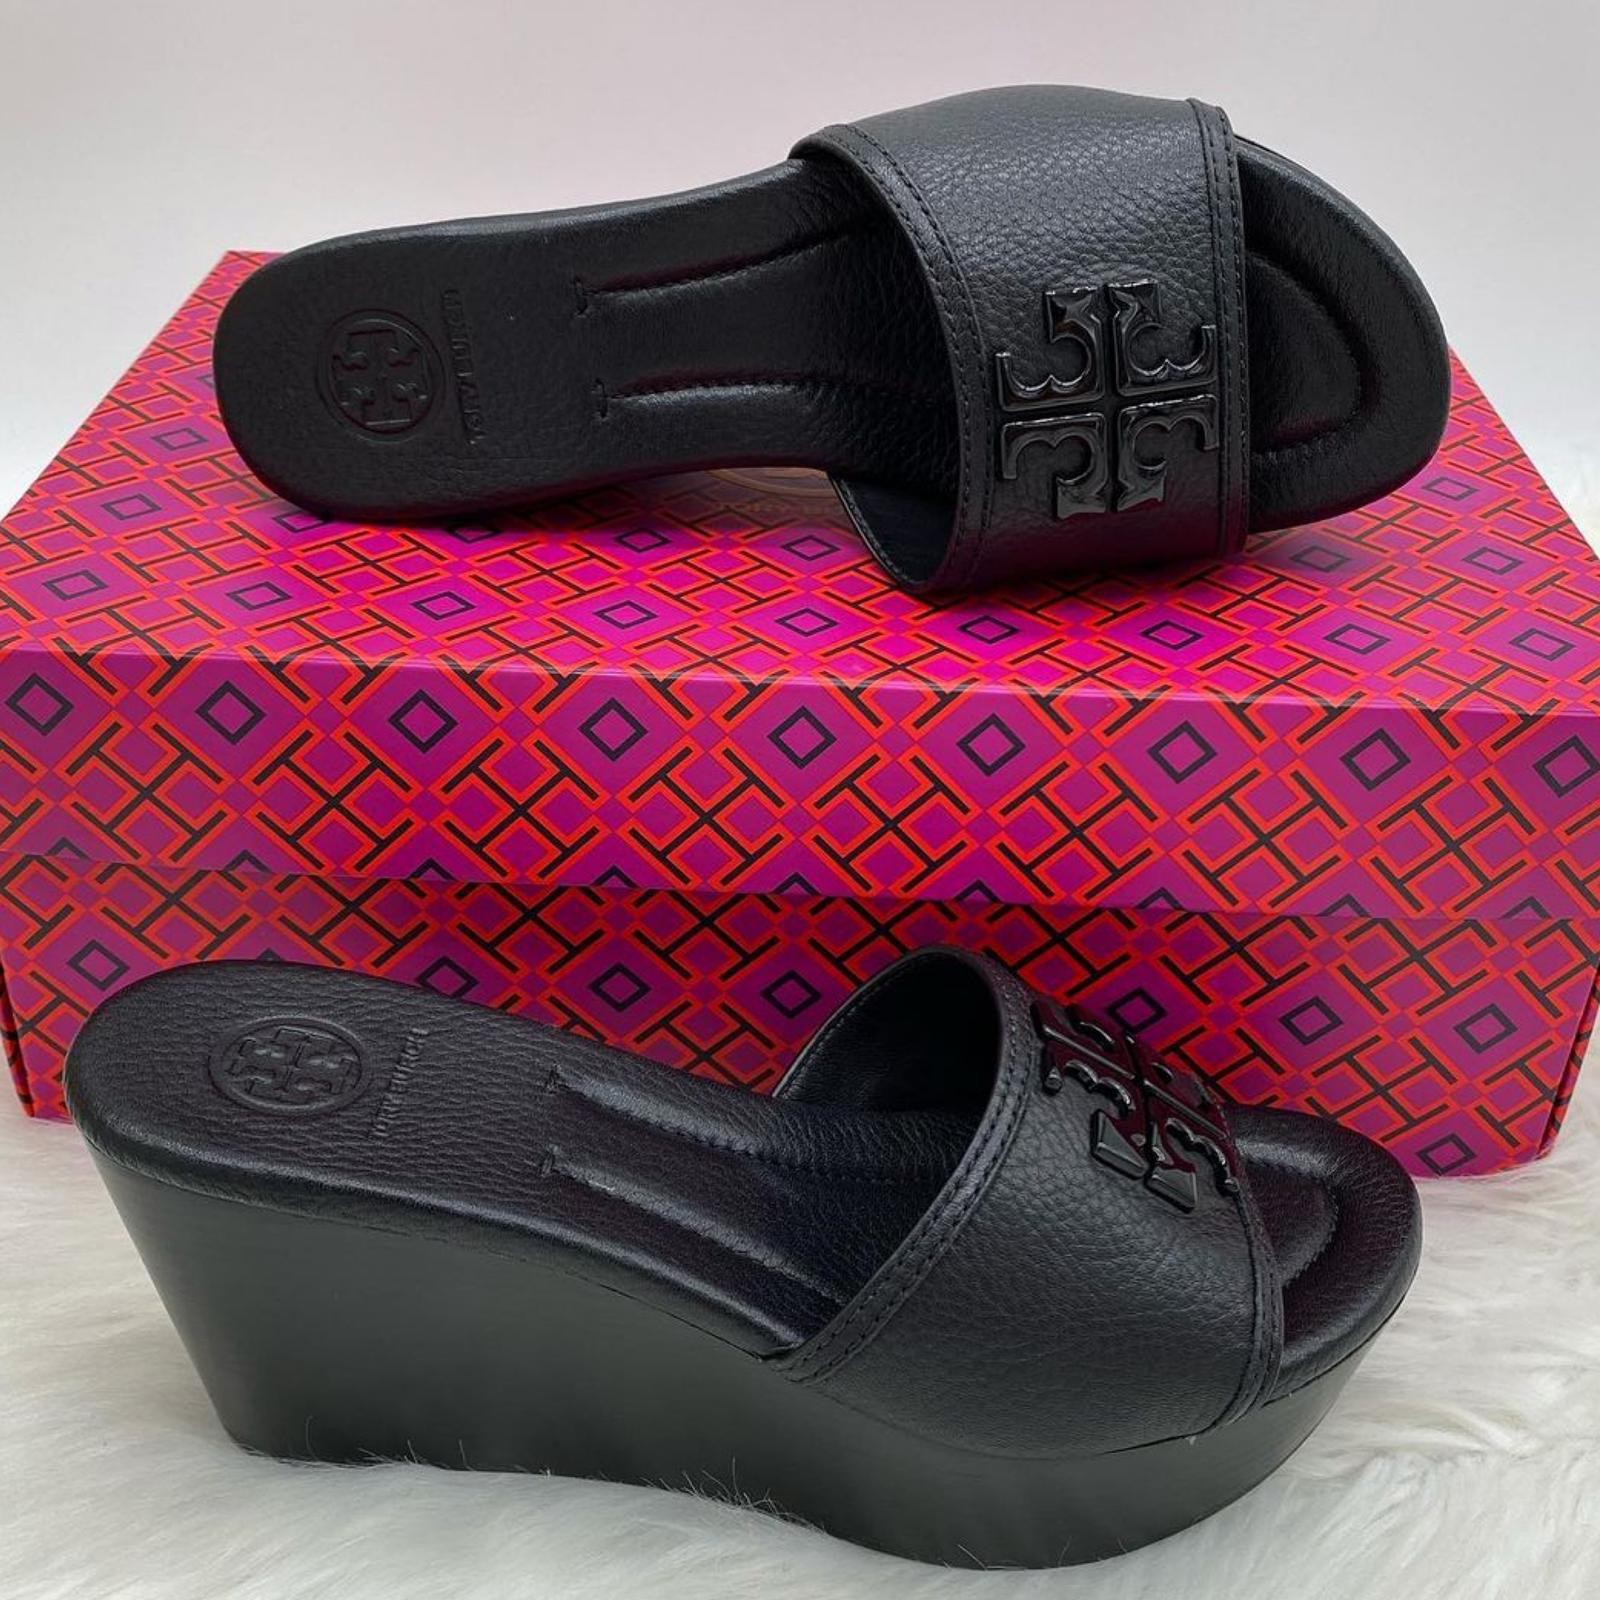 TORY BURCH LOWELL 2 80MM WEDGE SLIDE 50878 - PERFECT BLACK - SIZE US 6.5